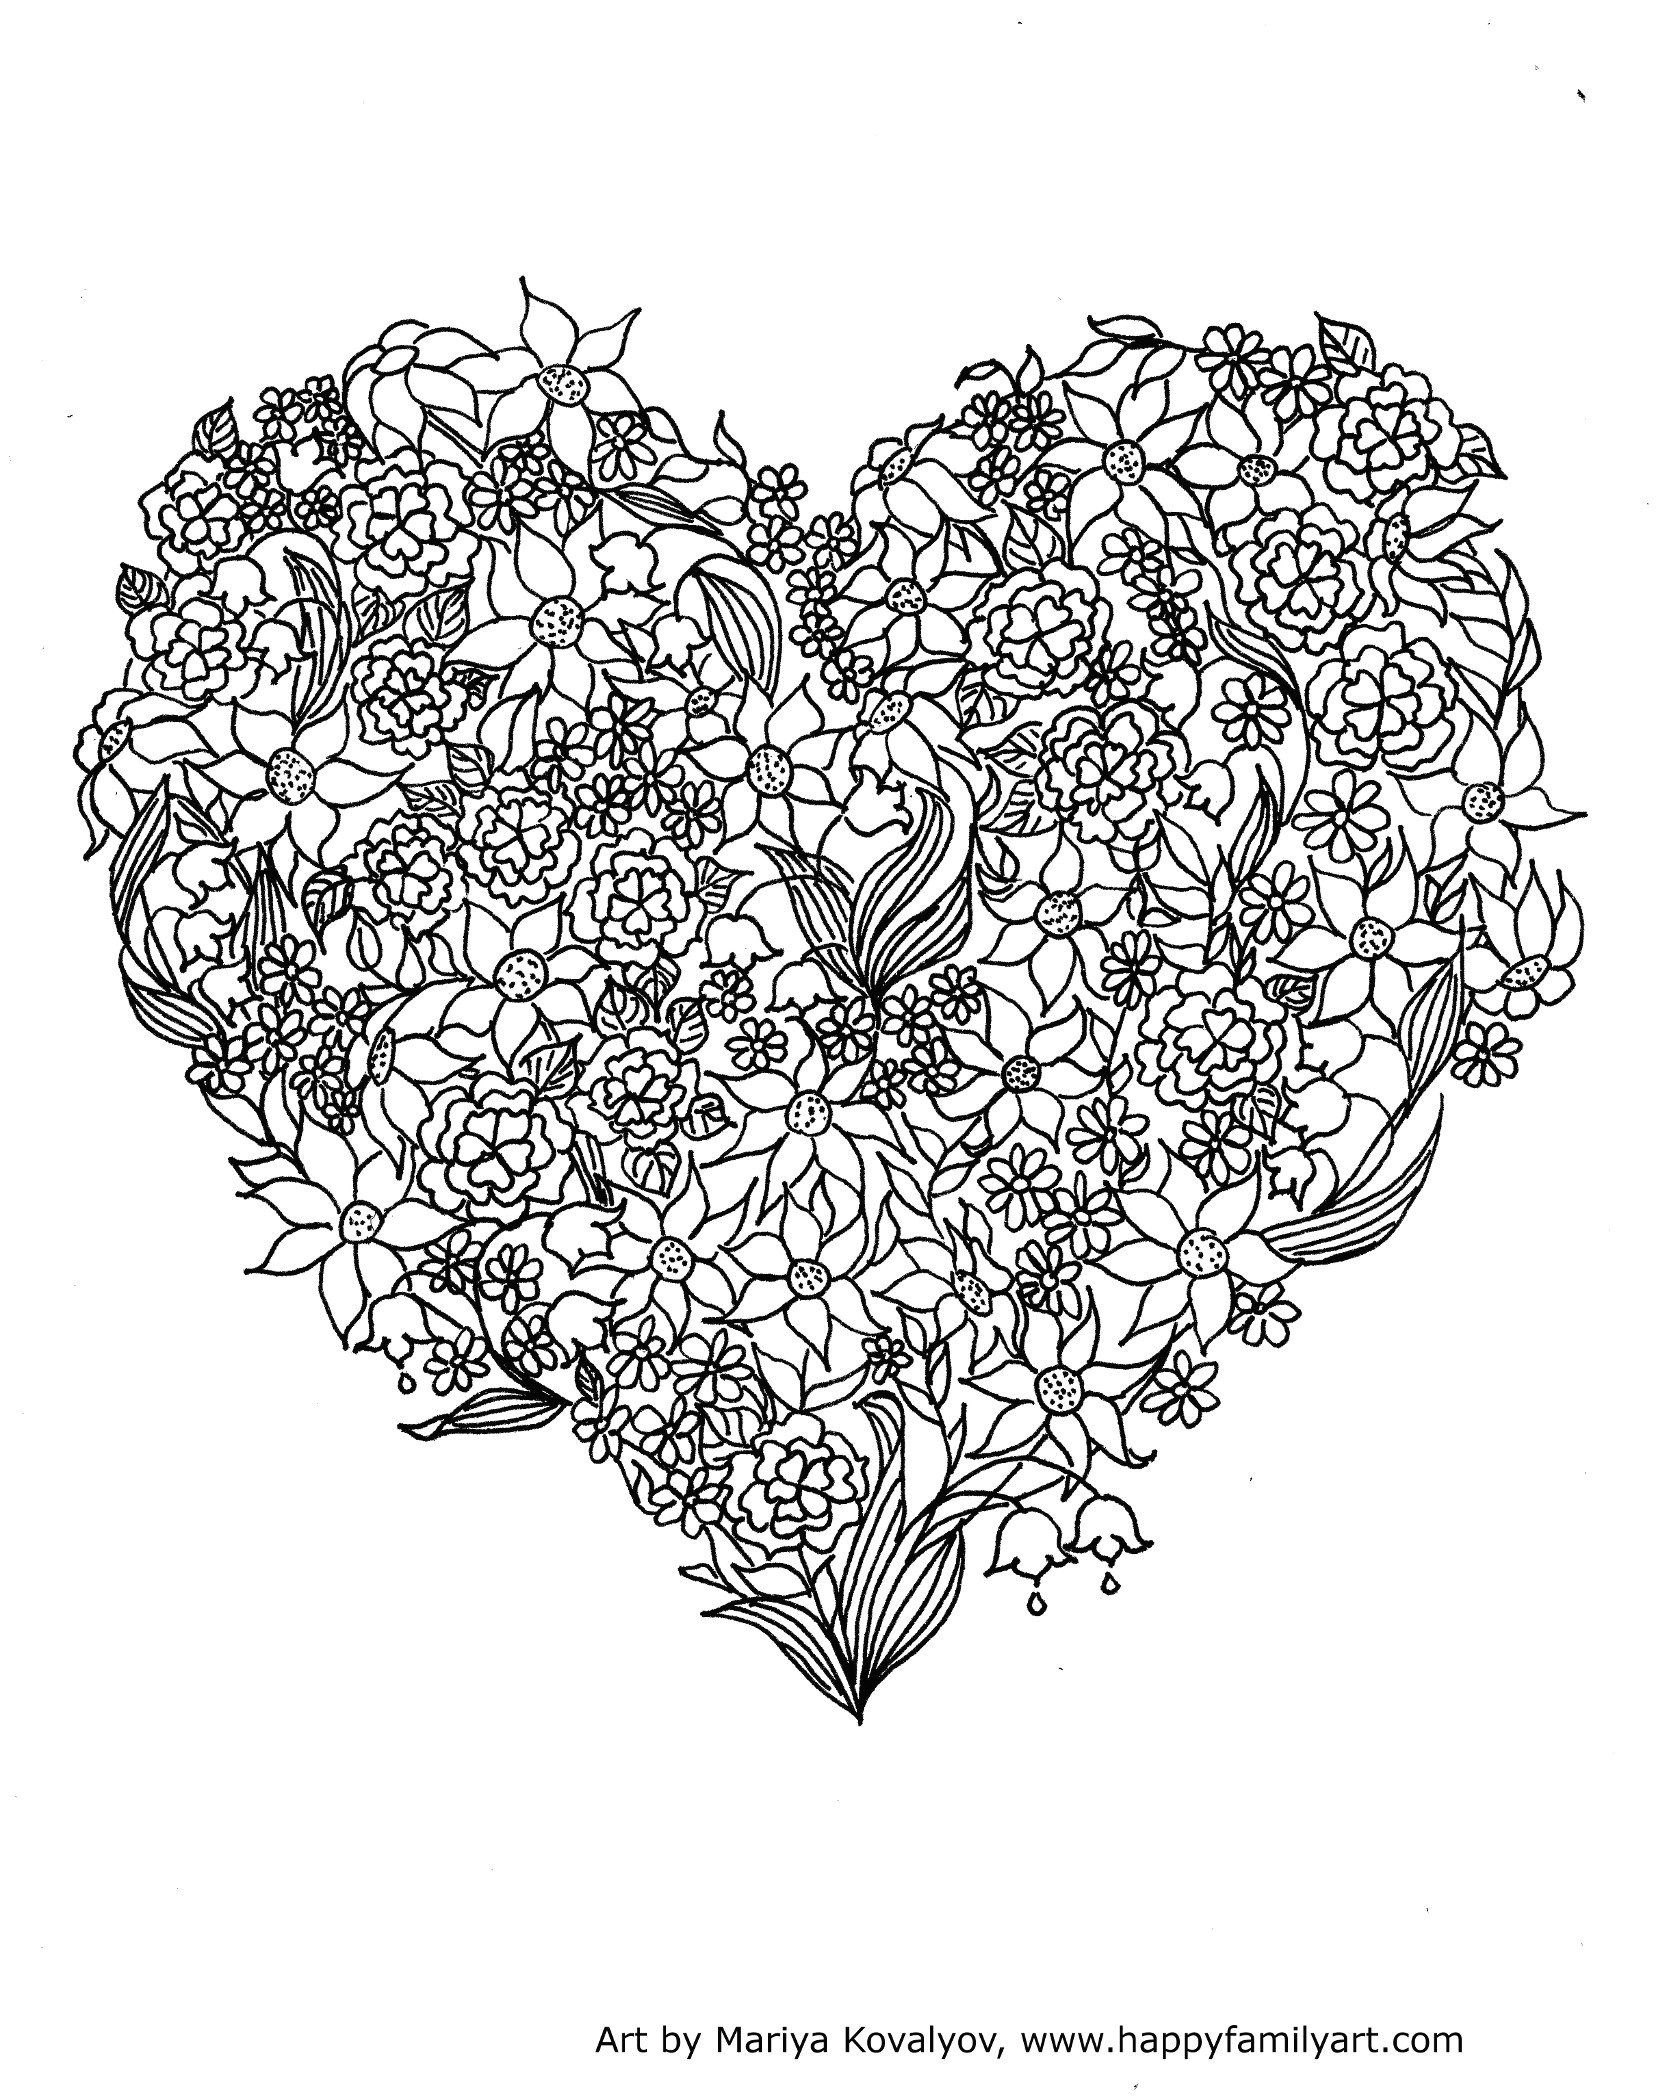 21+ Amazing Picture of Valentines Day Coloring Pages - birijus.com